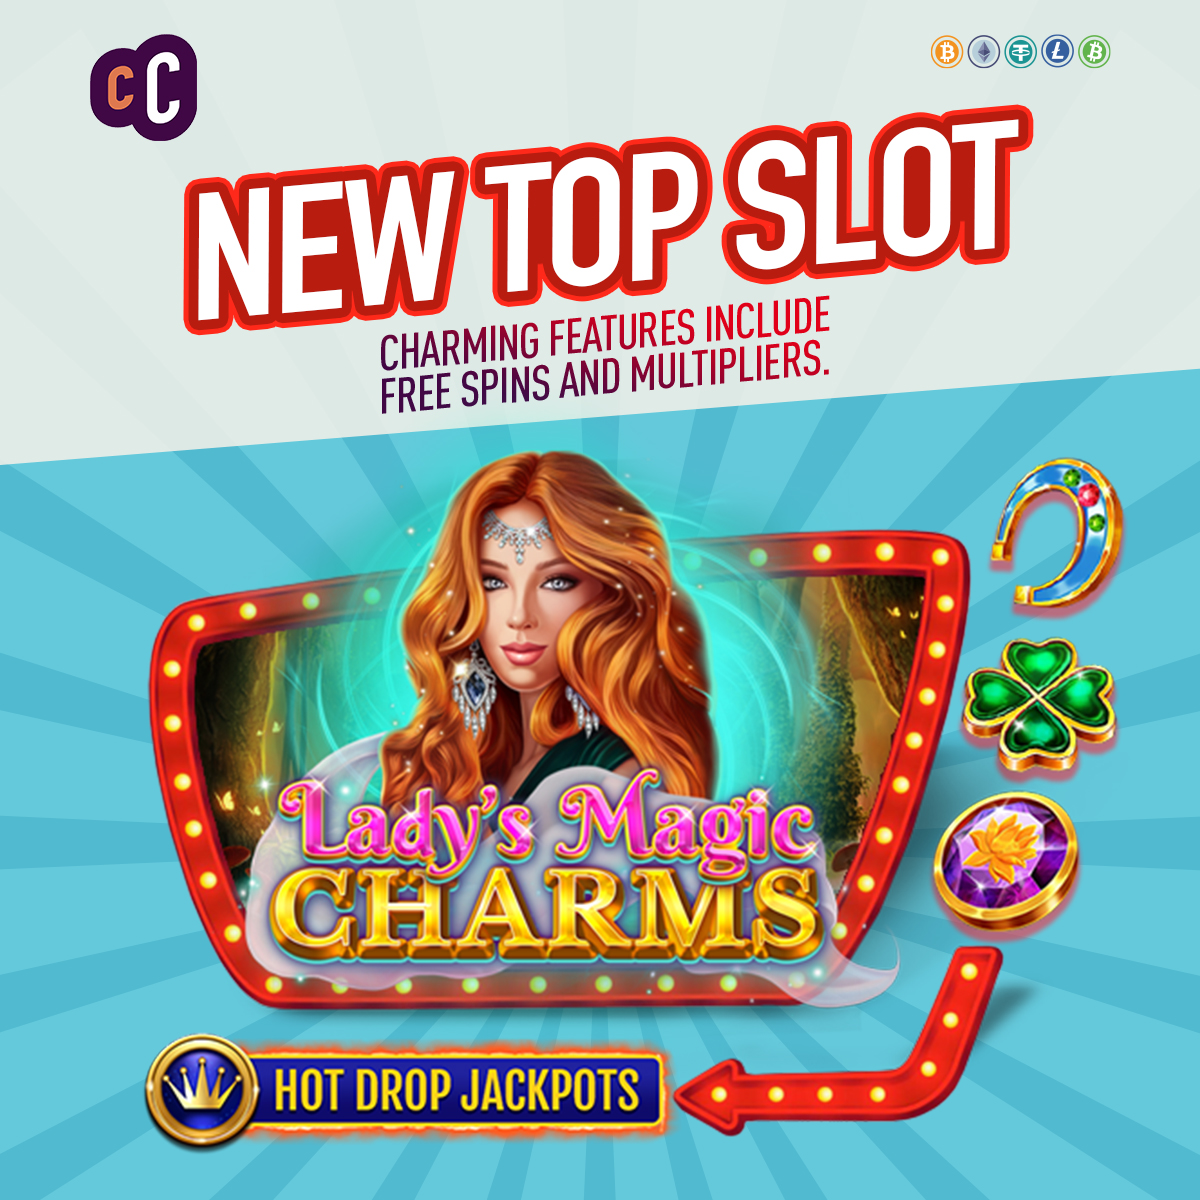 Cafe Casino's new top slot - Lady's Magic Charms - which features the main character with red hair standing behind the log oand beside online slots symbols like horseshoes and four-leaf clovers